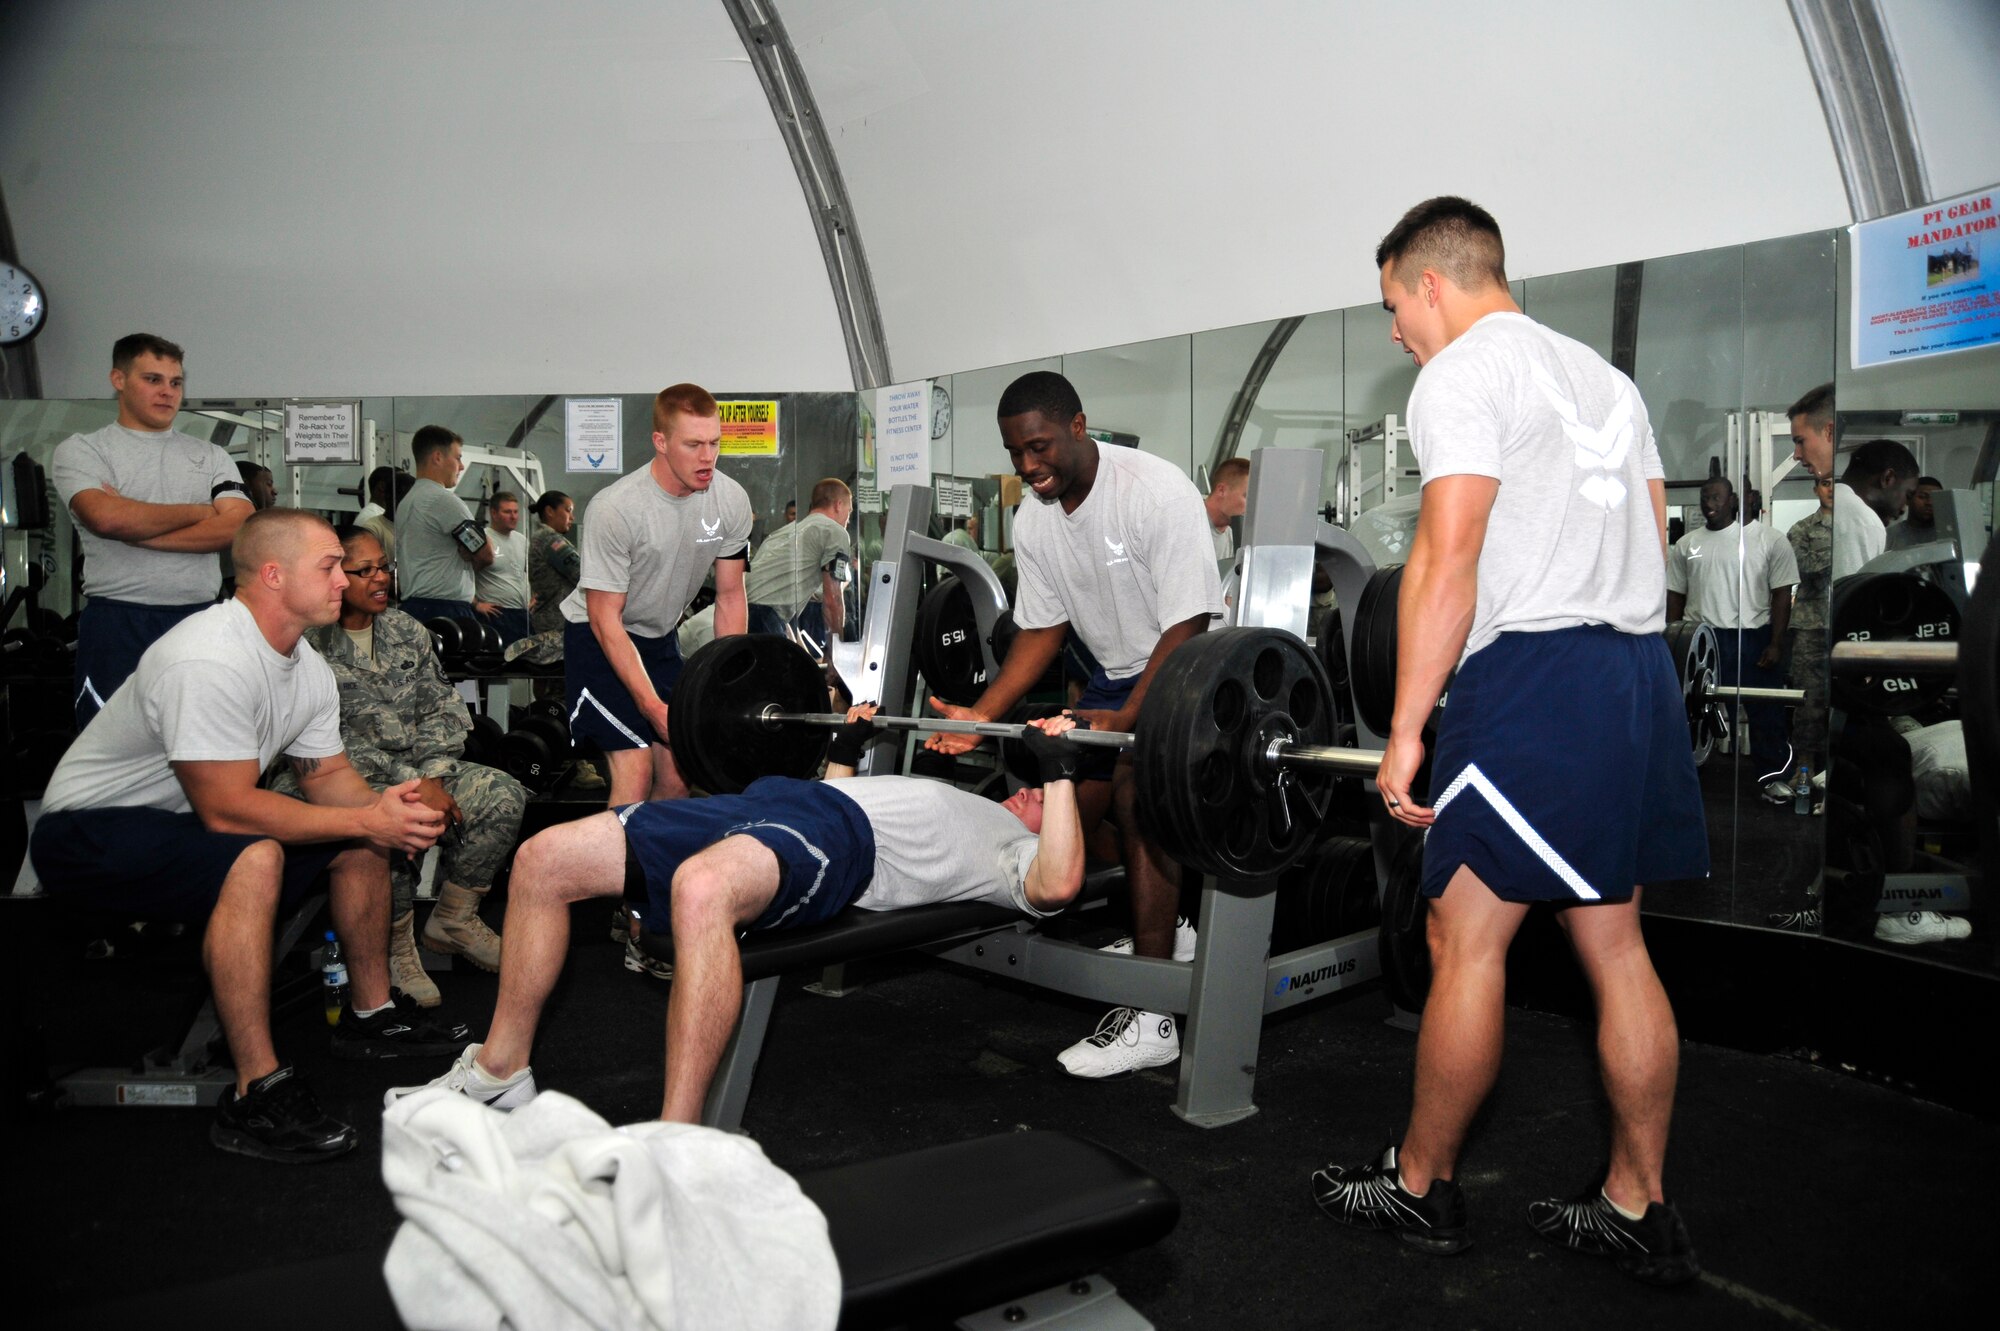 SOUTHWEST ASIA – Senior Airman Bobby Sebring, 380th Expeditionary Communications Squadron, attempts to bench presses 320 pounds at the “Strongest in the AOR” competition Dec. 18, 2009. Airman Sebring won 1st place in the bench press category. (U.S. Air Force photo/Tech. Sgt. Charles Larkin Sr)